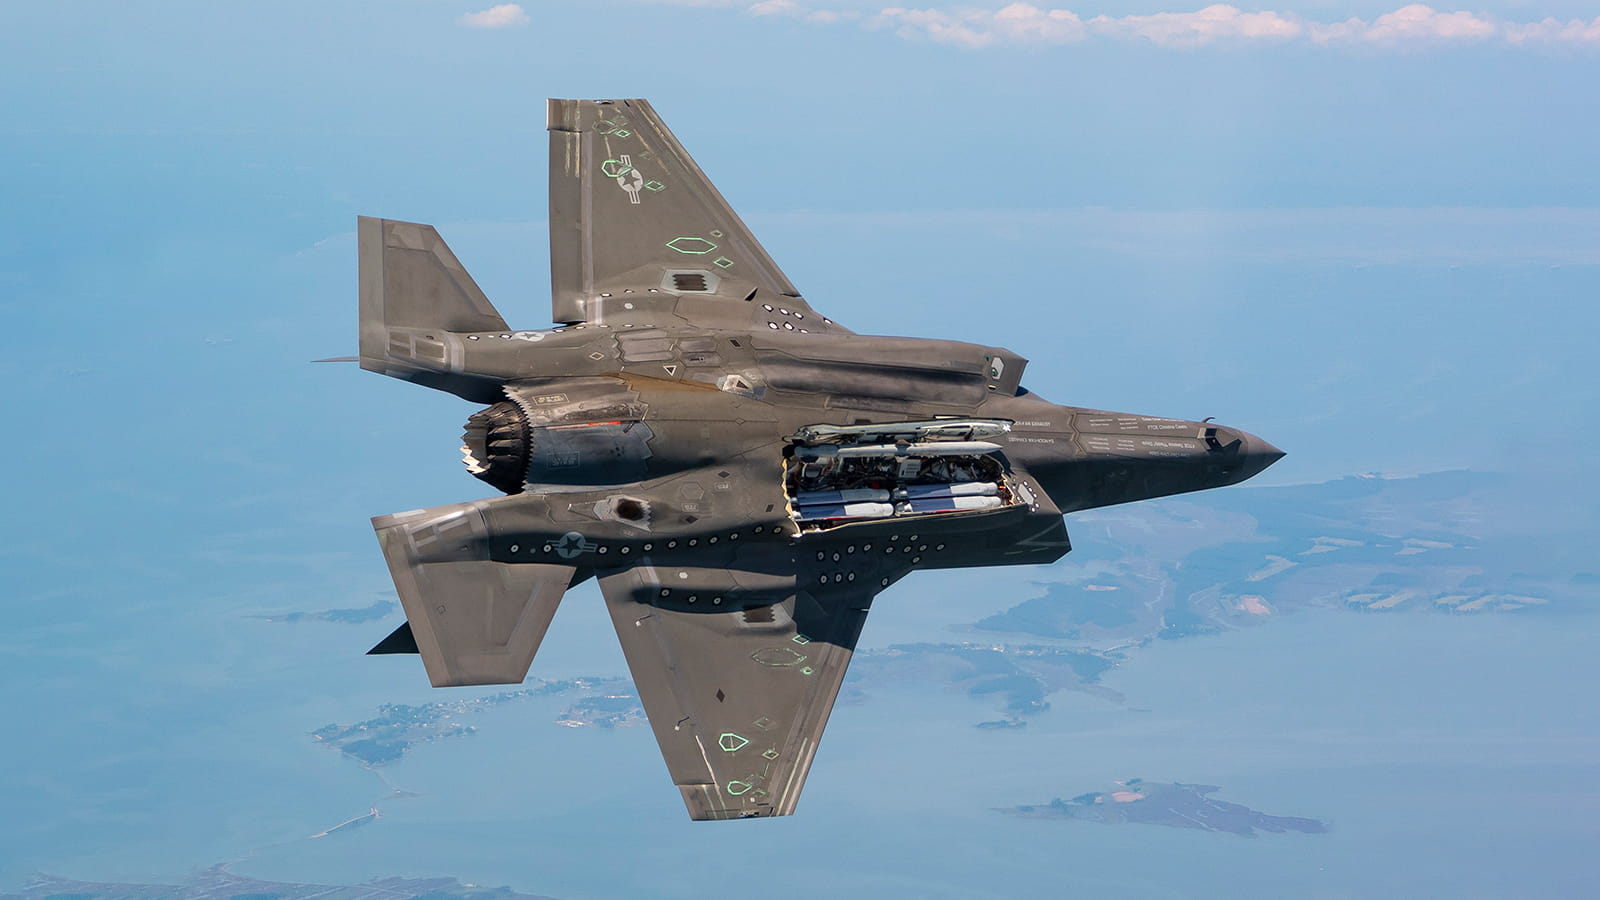 F-35B Lightning II equipped with StormBreaker air-to-surface munition